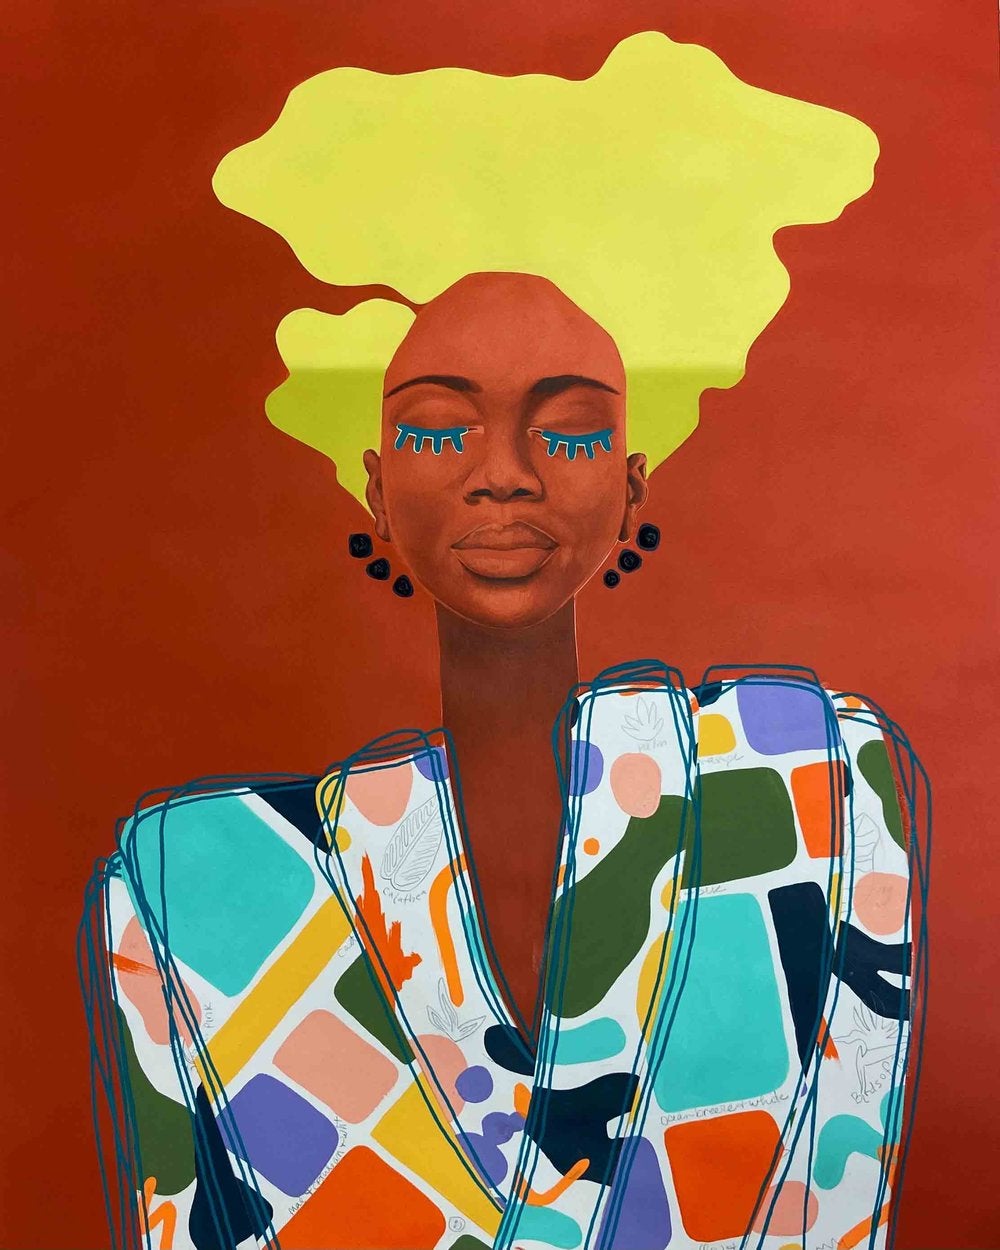 “Who She Found In The Looking Glass” Explores Concepts Of Self-Identity With Black Women As The Artists And Muses